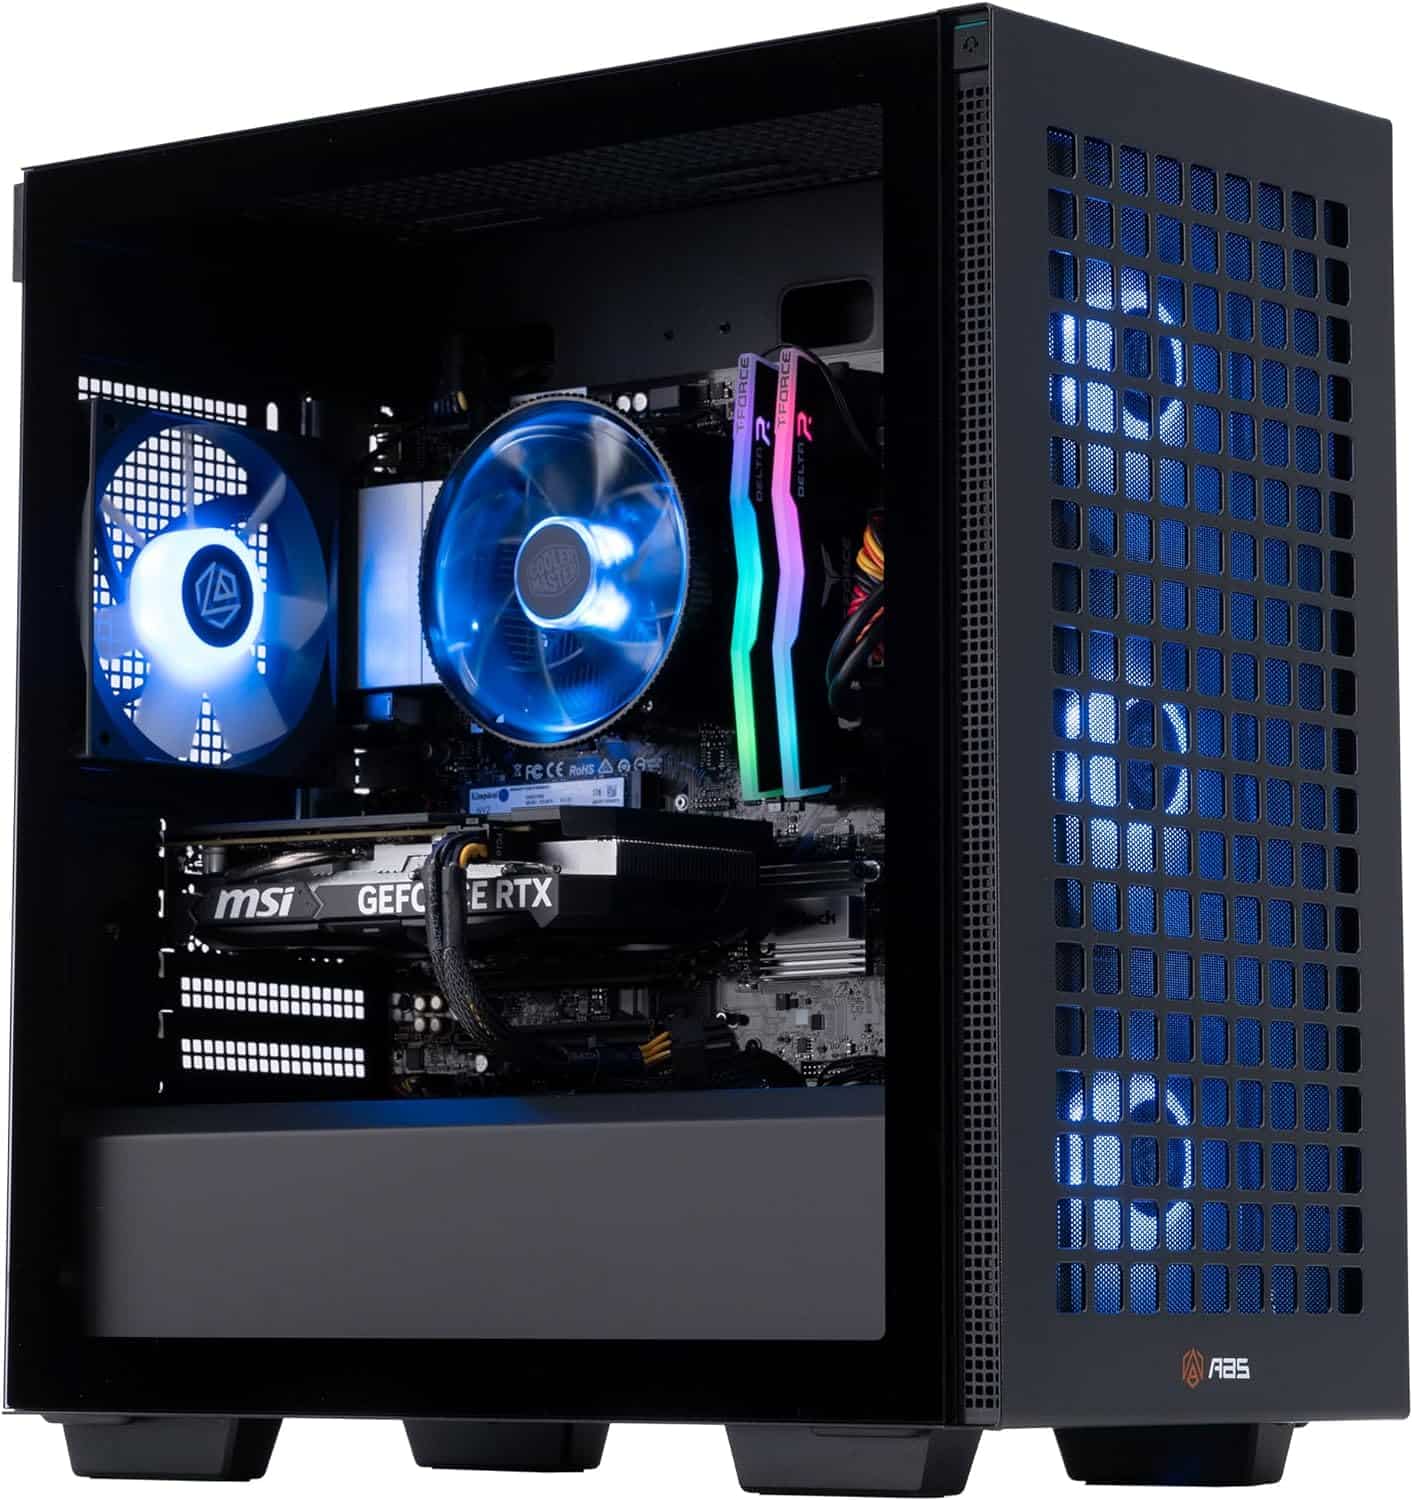 Save Big on Cyberpower Xtreme VR Gaming PC with Incredible Black Friday Deal